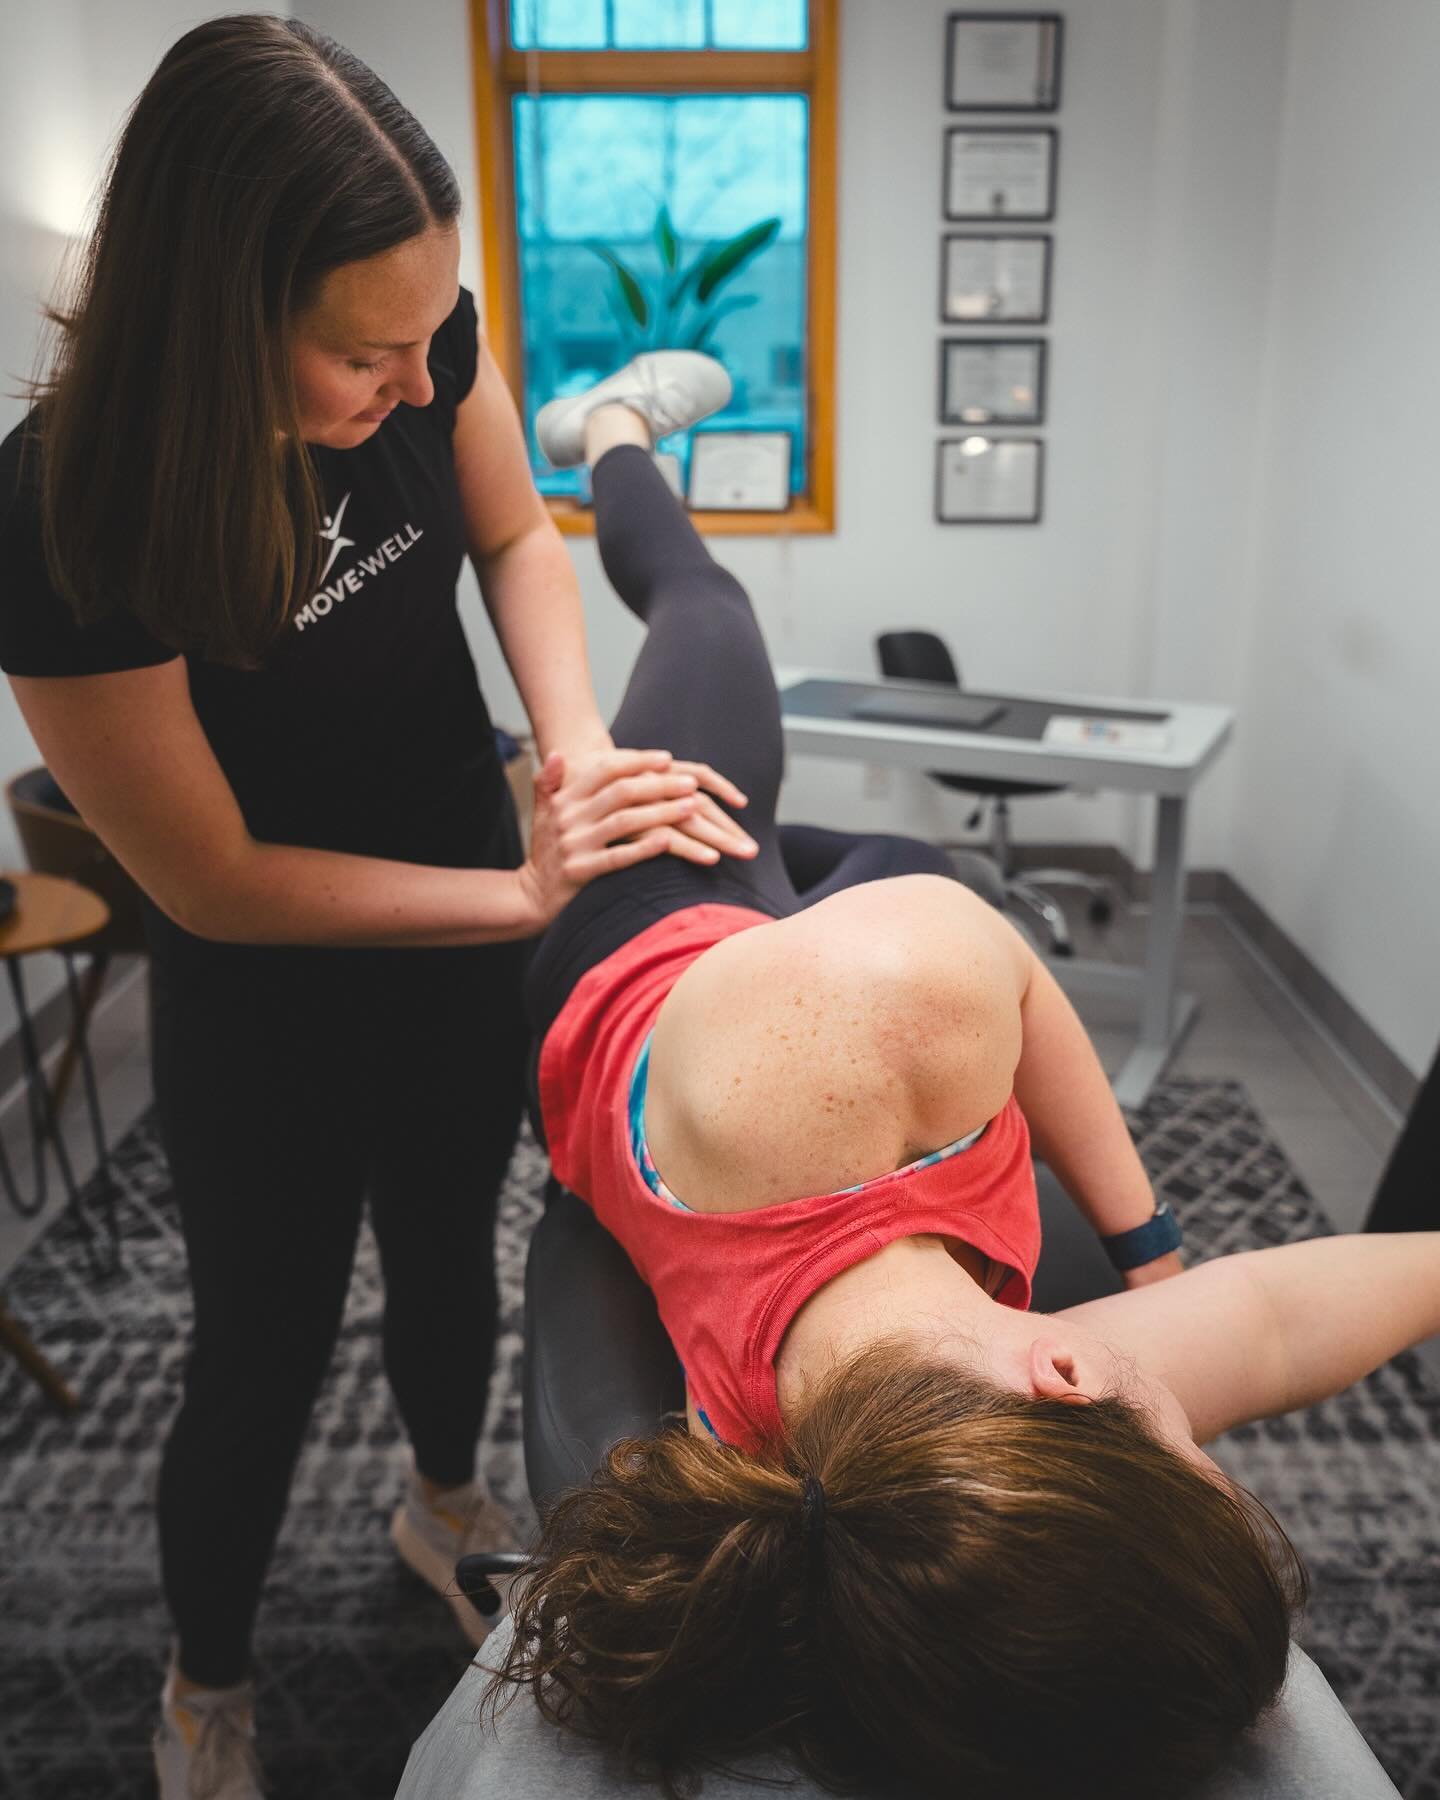 Coupling manual therapies with our chiropractic adjustments can help in multiple ways:

✔️increased muscle extensibility
✔️pain management
✔️improved tissue repair
✔️reduced muscle tension
✔️increased joint mobility 

⭐️Want to see how this could hel